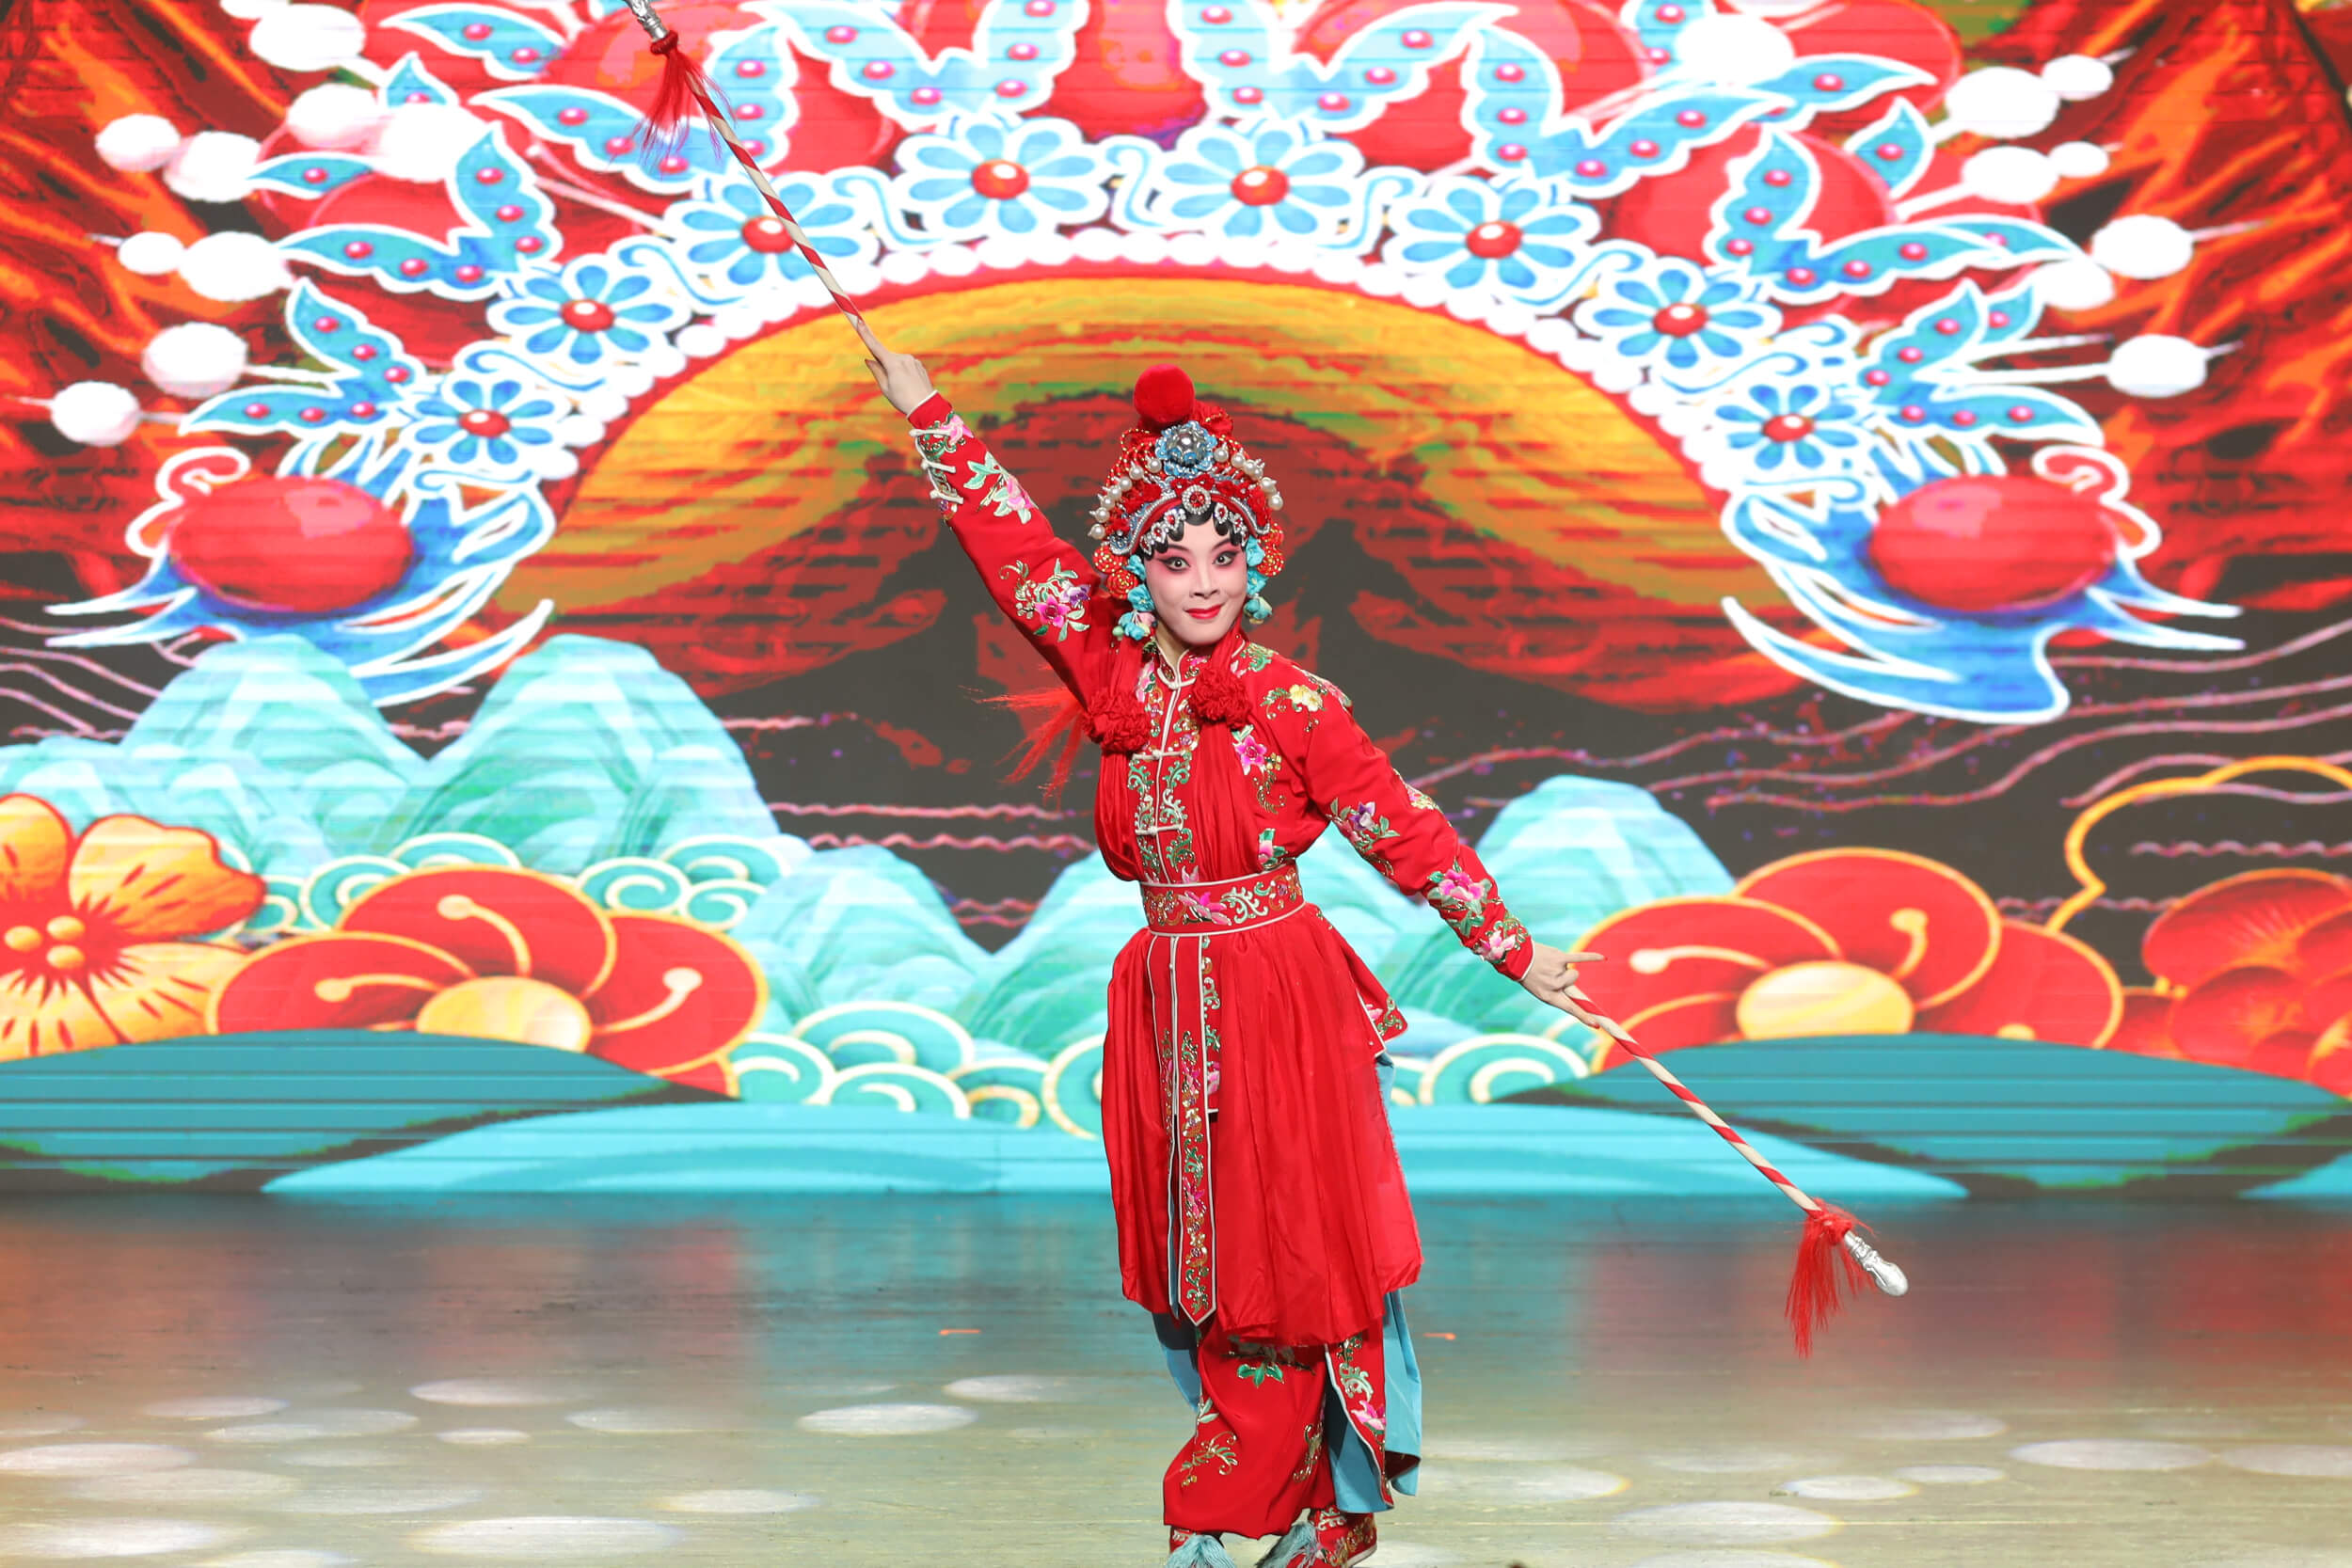 The Peking Opera martial arts drama “Sizhou City” is a famous Wudan opera. It involves martial arts abilities performed elegantly and exquisitely in one go.